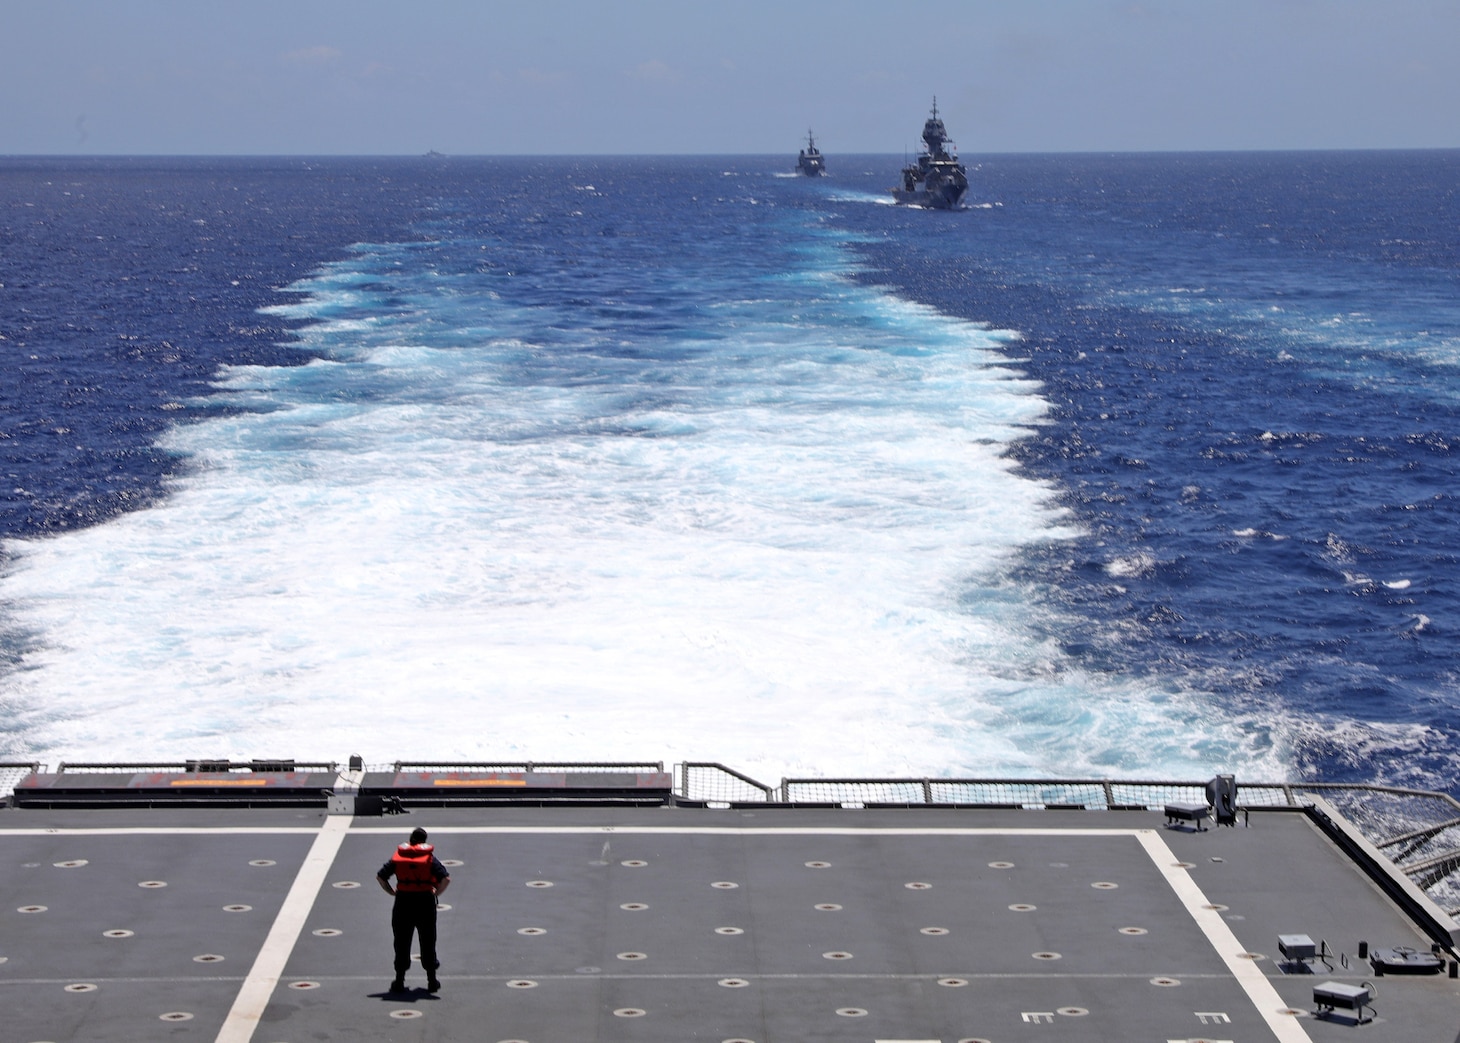 Information Systems Technicians 3rd Class Isabella Tafoya, attached to the Independence-variant littoral combat ship USS Mobile (LCS 26), observes the Royal Australian Navy frigate HMAS Warramunga (FFG152) and French Navy Floréal-class frigate FS Vendémiaire (F 734) from the flight deck, during trilateral operations in the South China Sea. Mobile, part of Destroyer Squadron 7, is on a rotational deployment operating in the U.S. 7th Fleet area of operations to enhance interoperability with Allies and partners and serve as a ready-response force in support of a free and open Indo-Pacific region. (U.S. Navy photo by Mass Communication Specialist 1st Class Liz Dunagan/RELEASED)